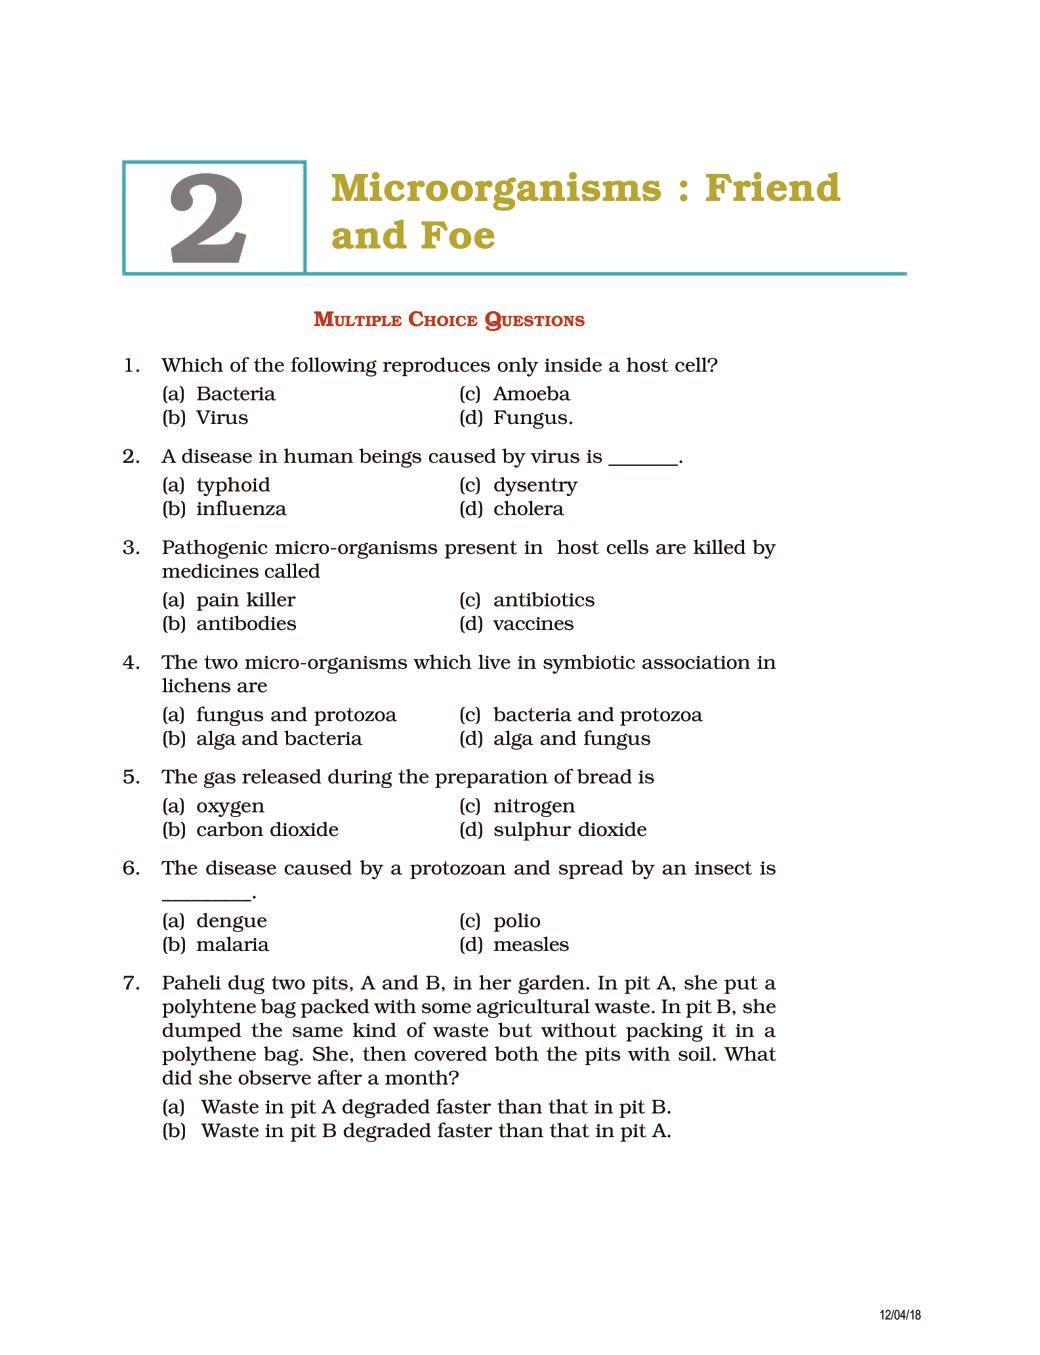 NCERT Exemplar Class 08 Science Unit 2 Microorganisms Friend and Foe - Page 1